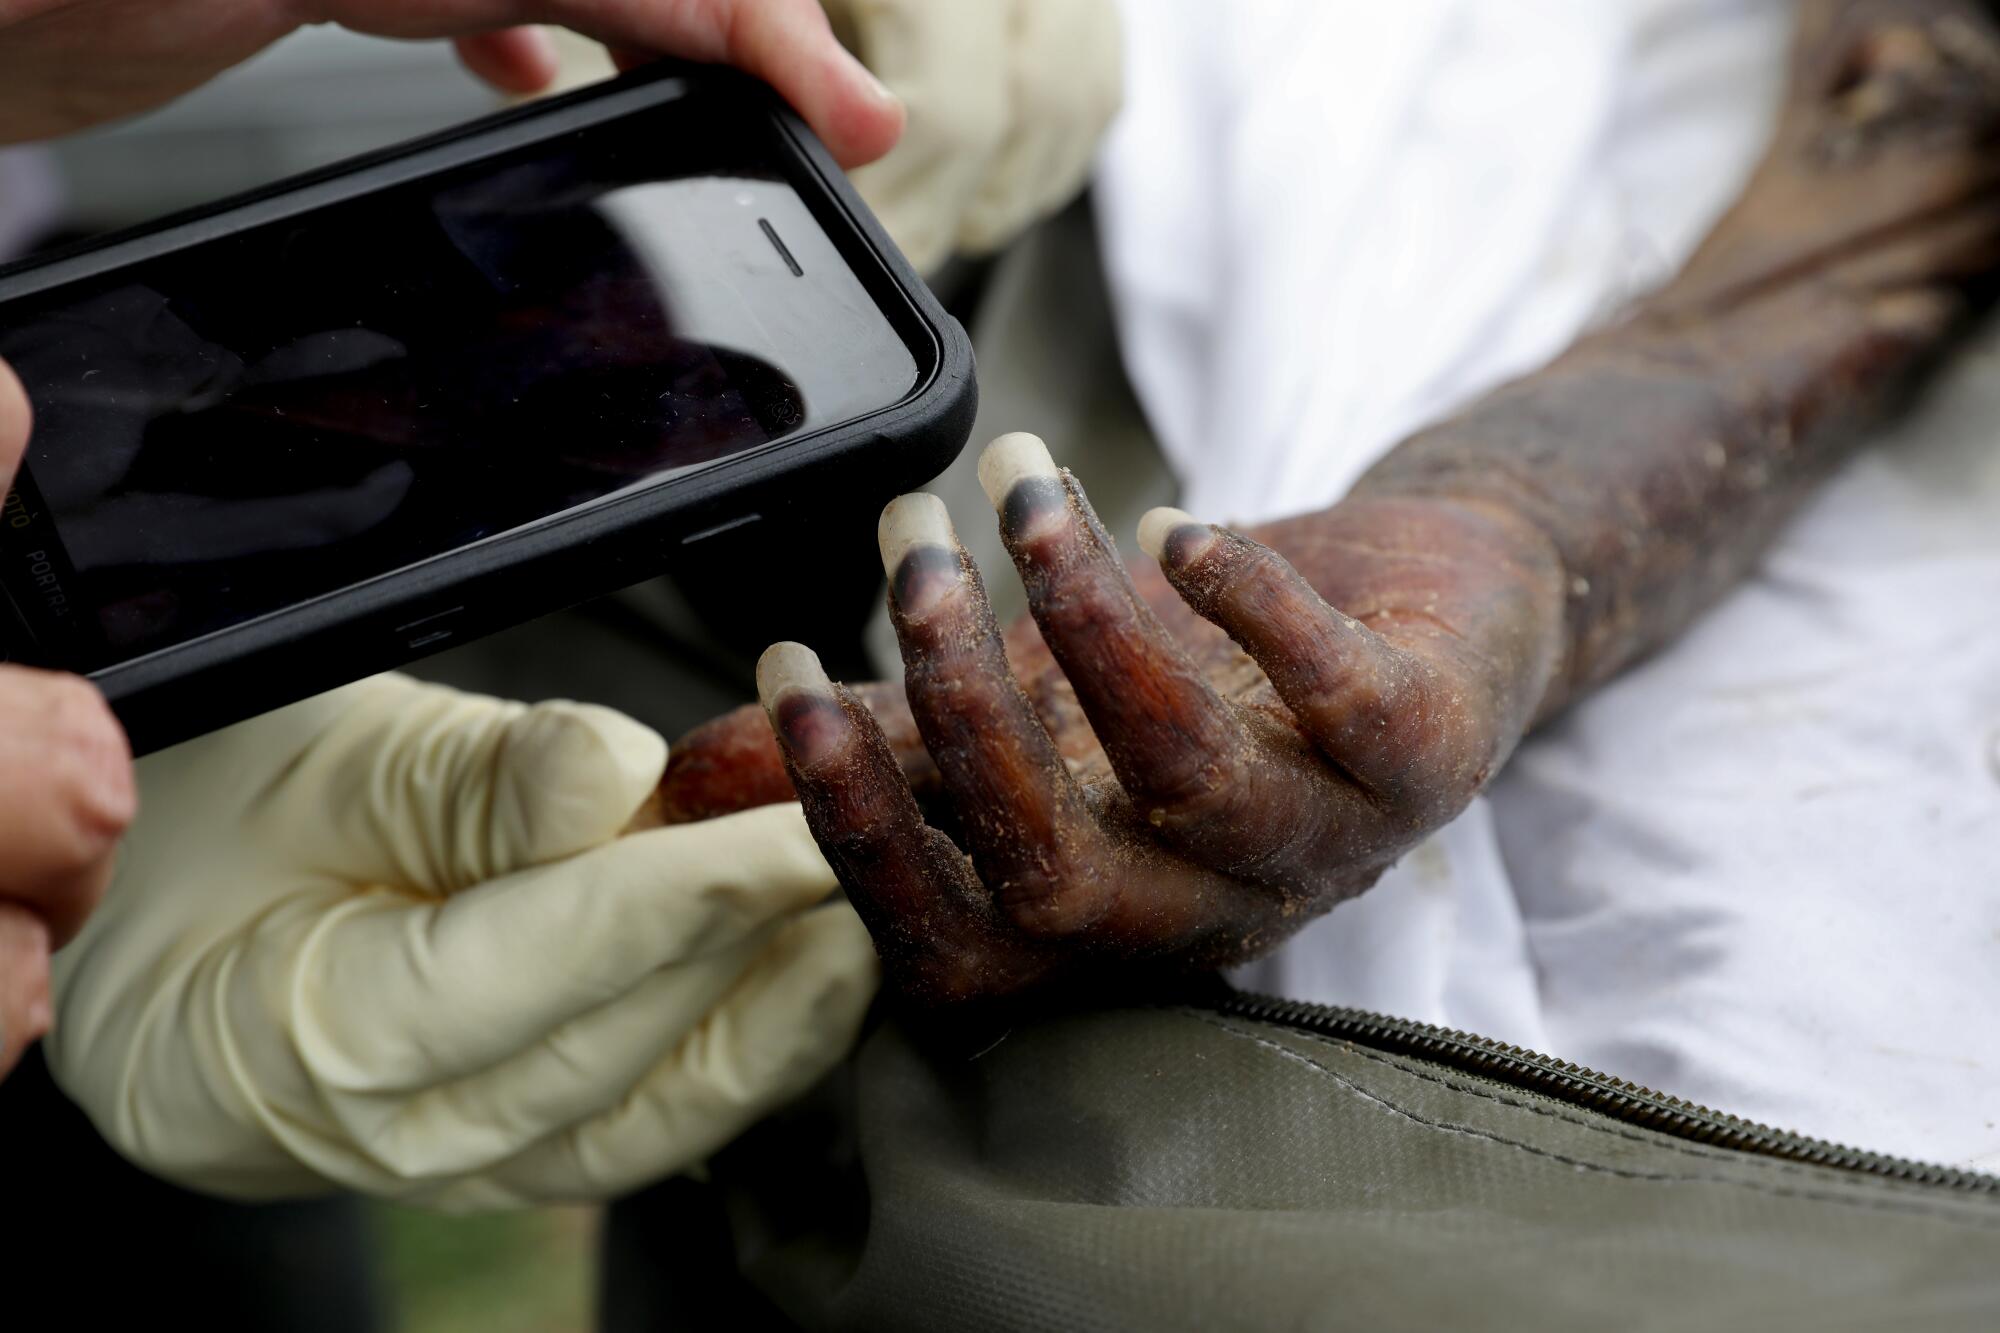 The hands of a corpse are photographed with a phone.